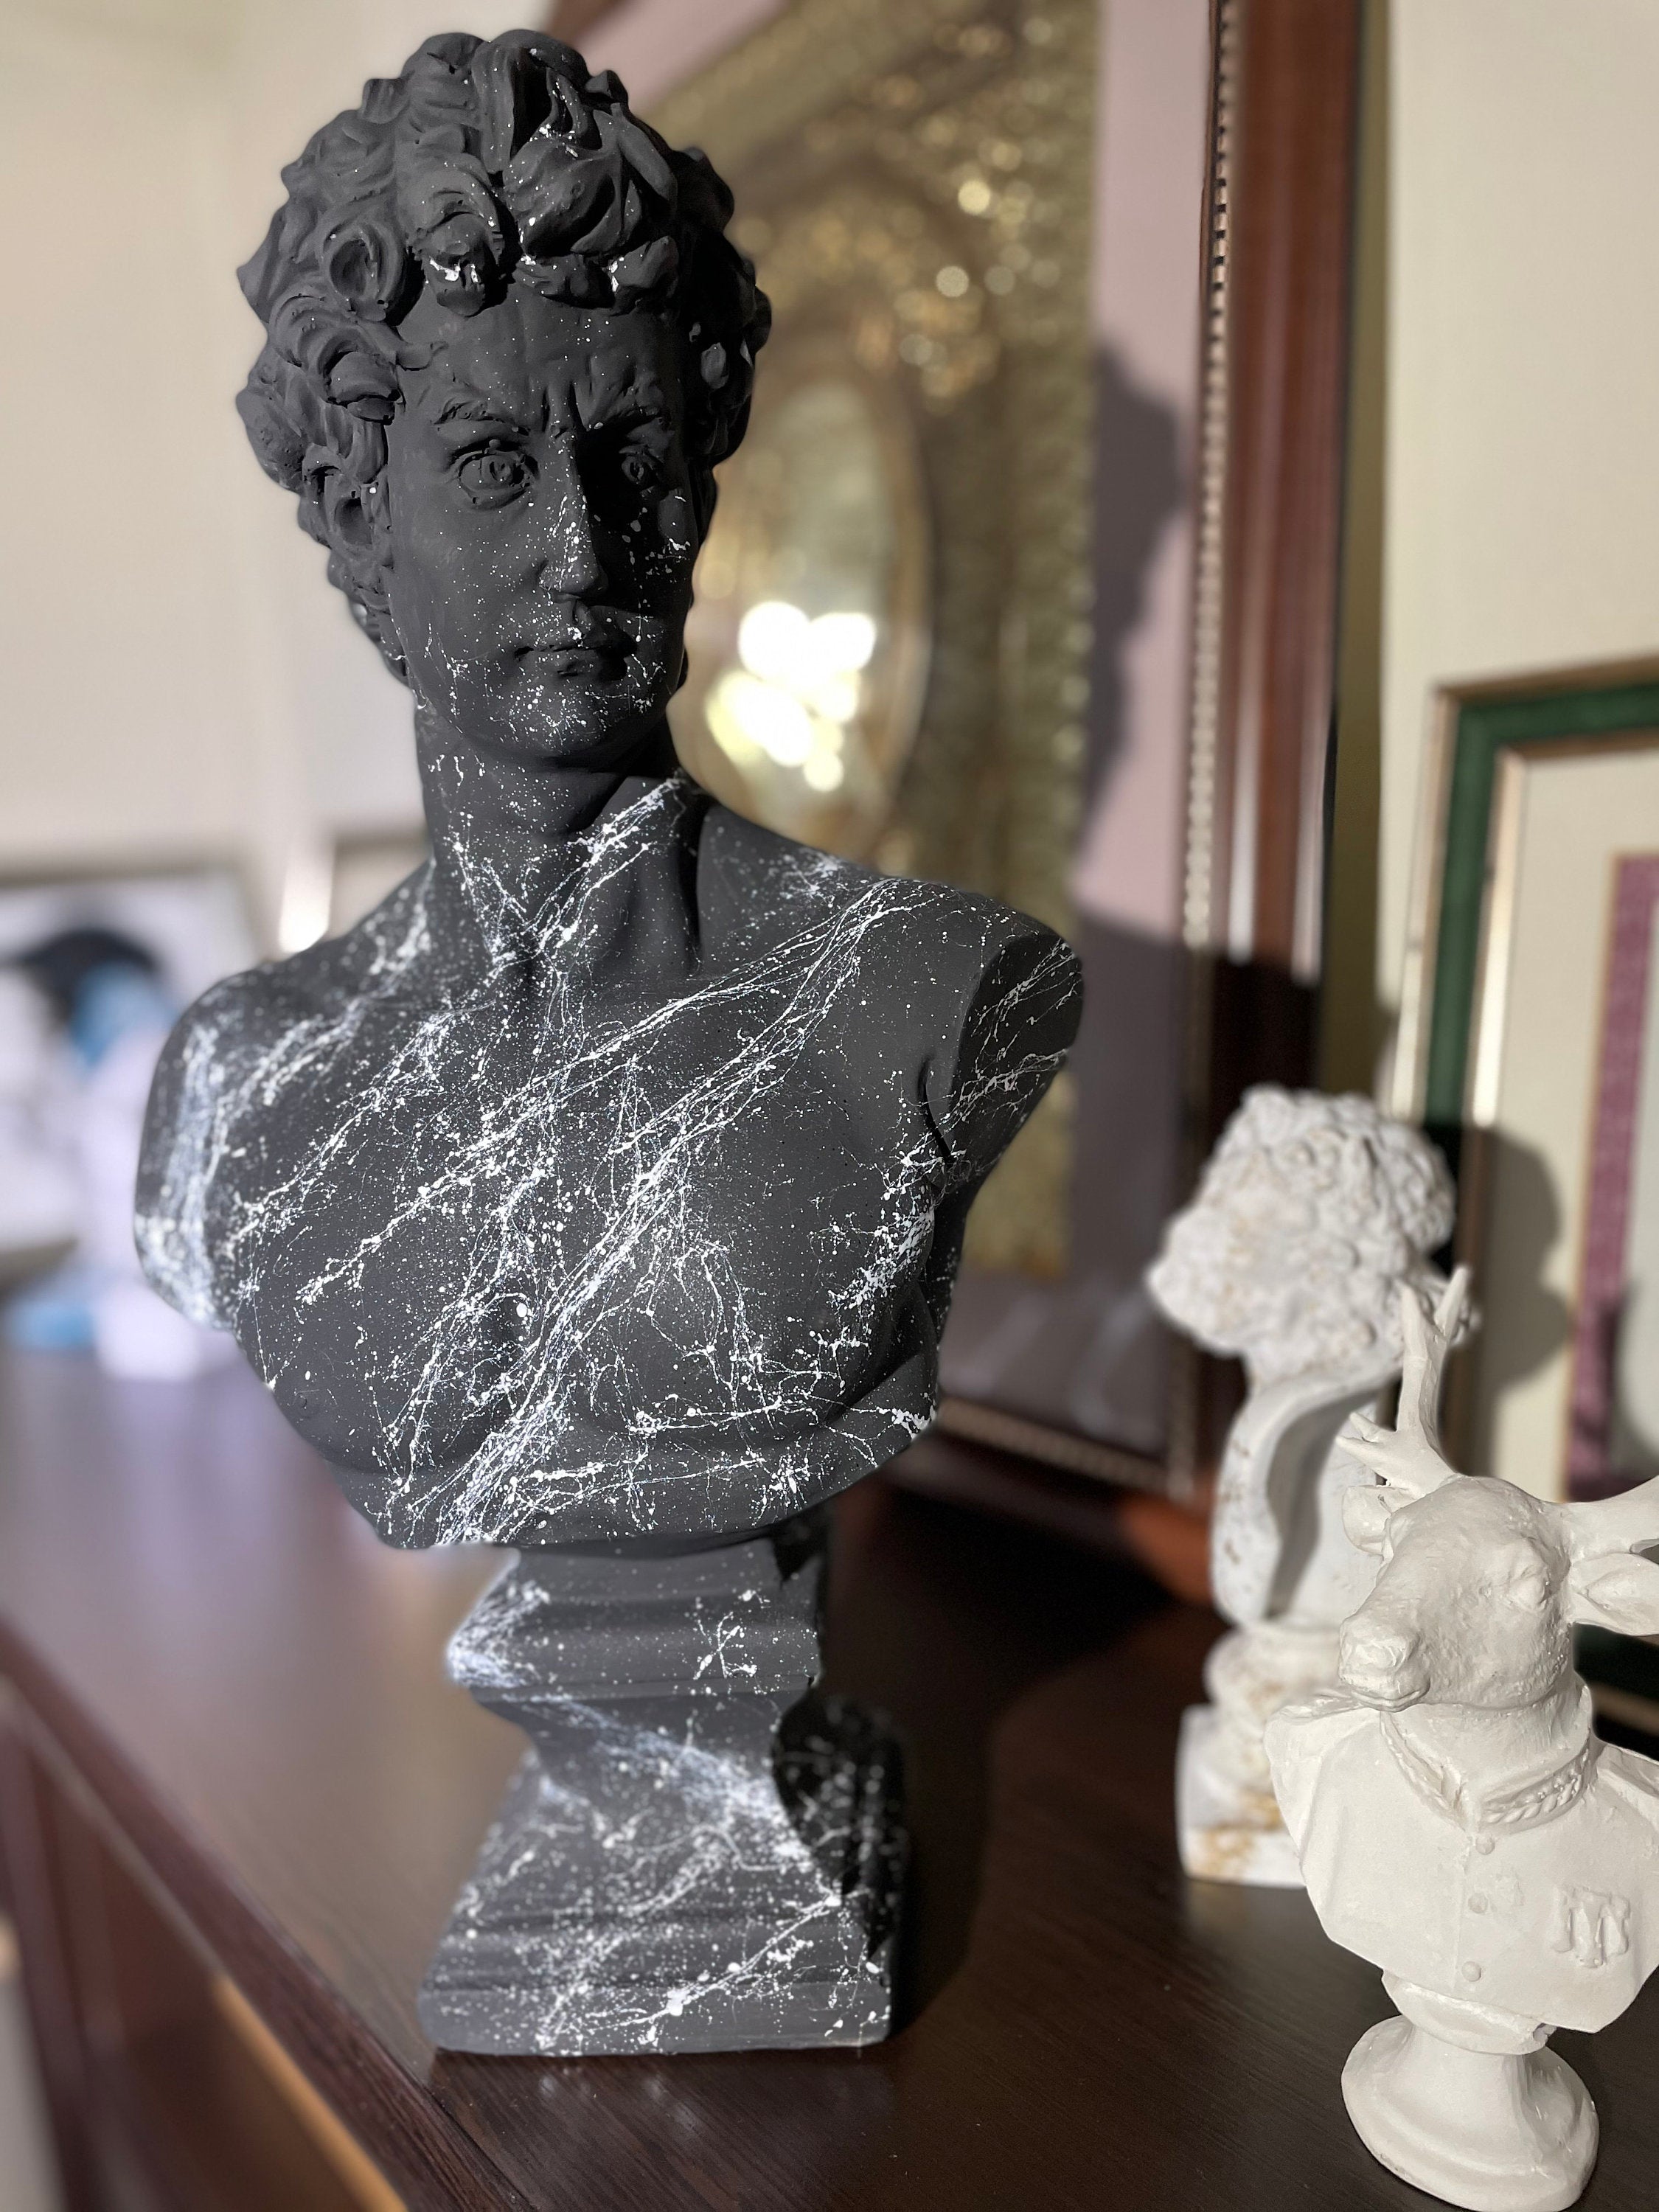 Classic Contrast: Large David Bust Sculpture in Black and White Marble